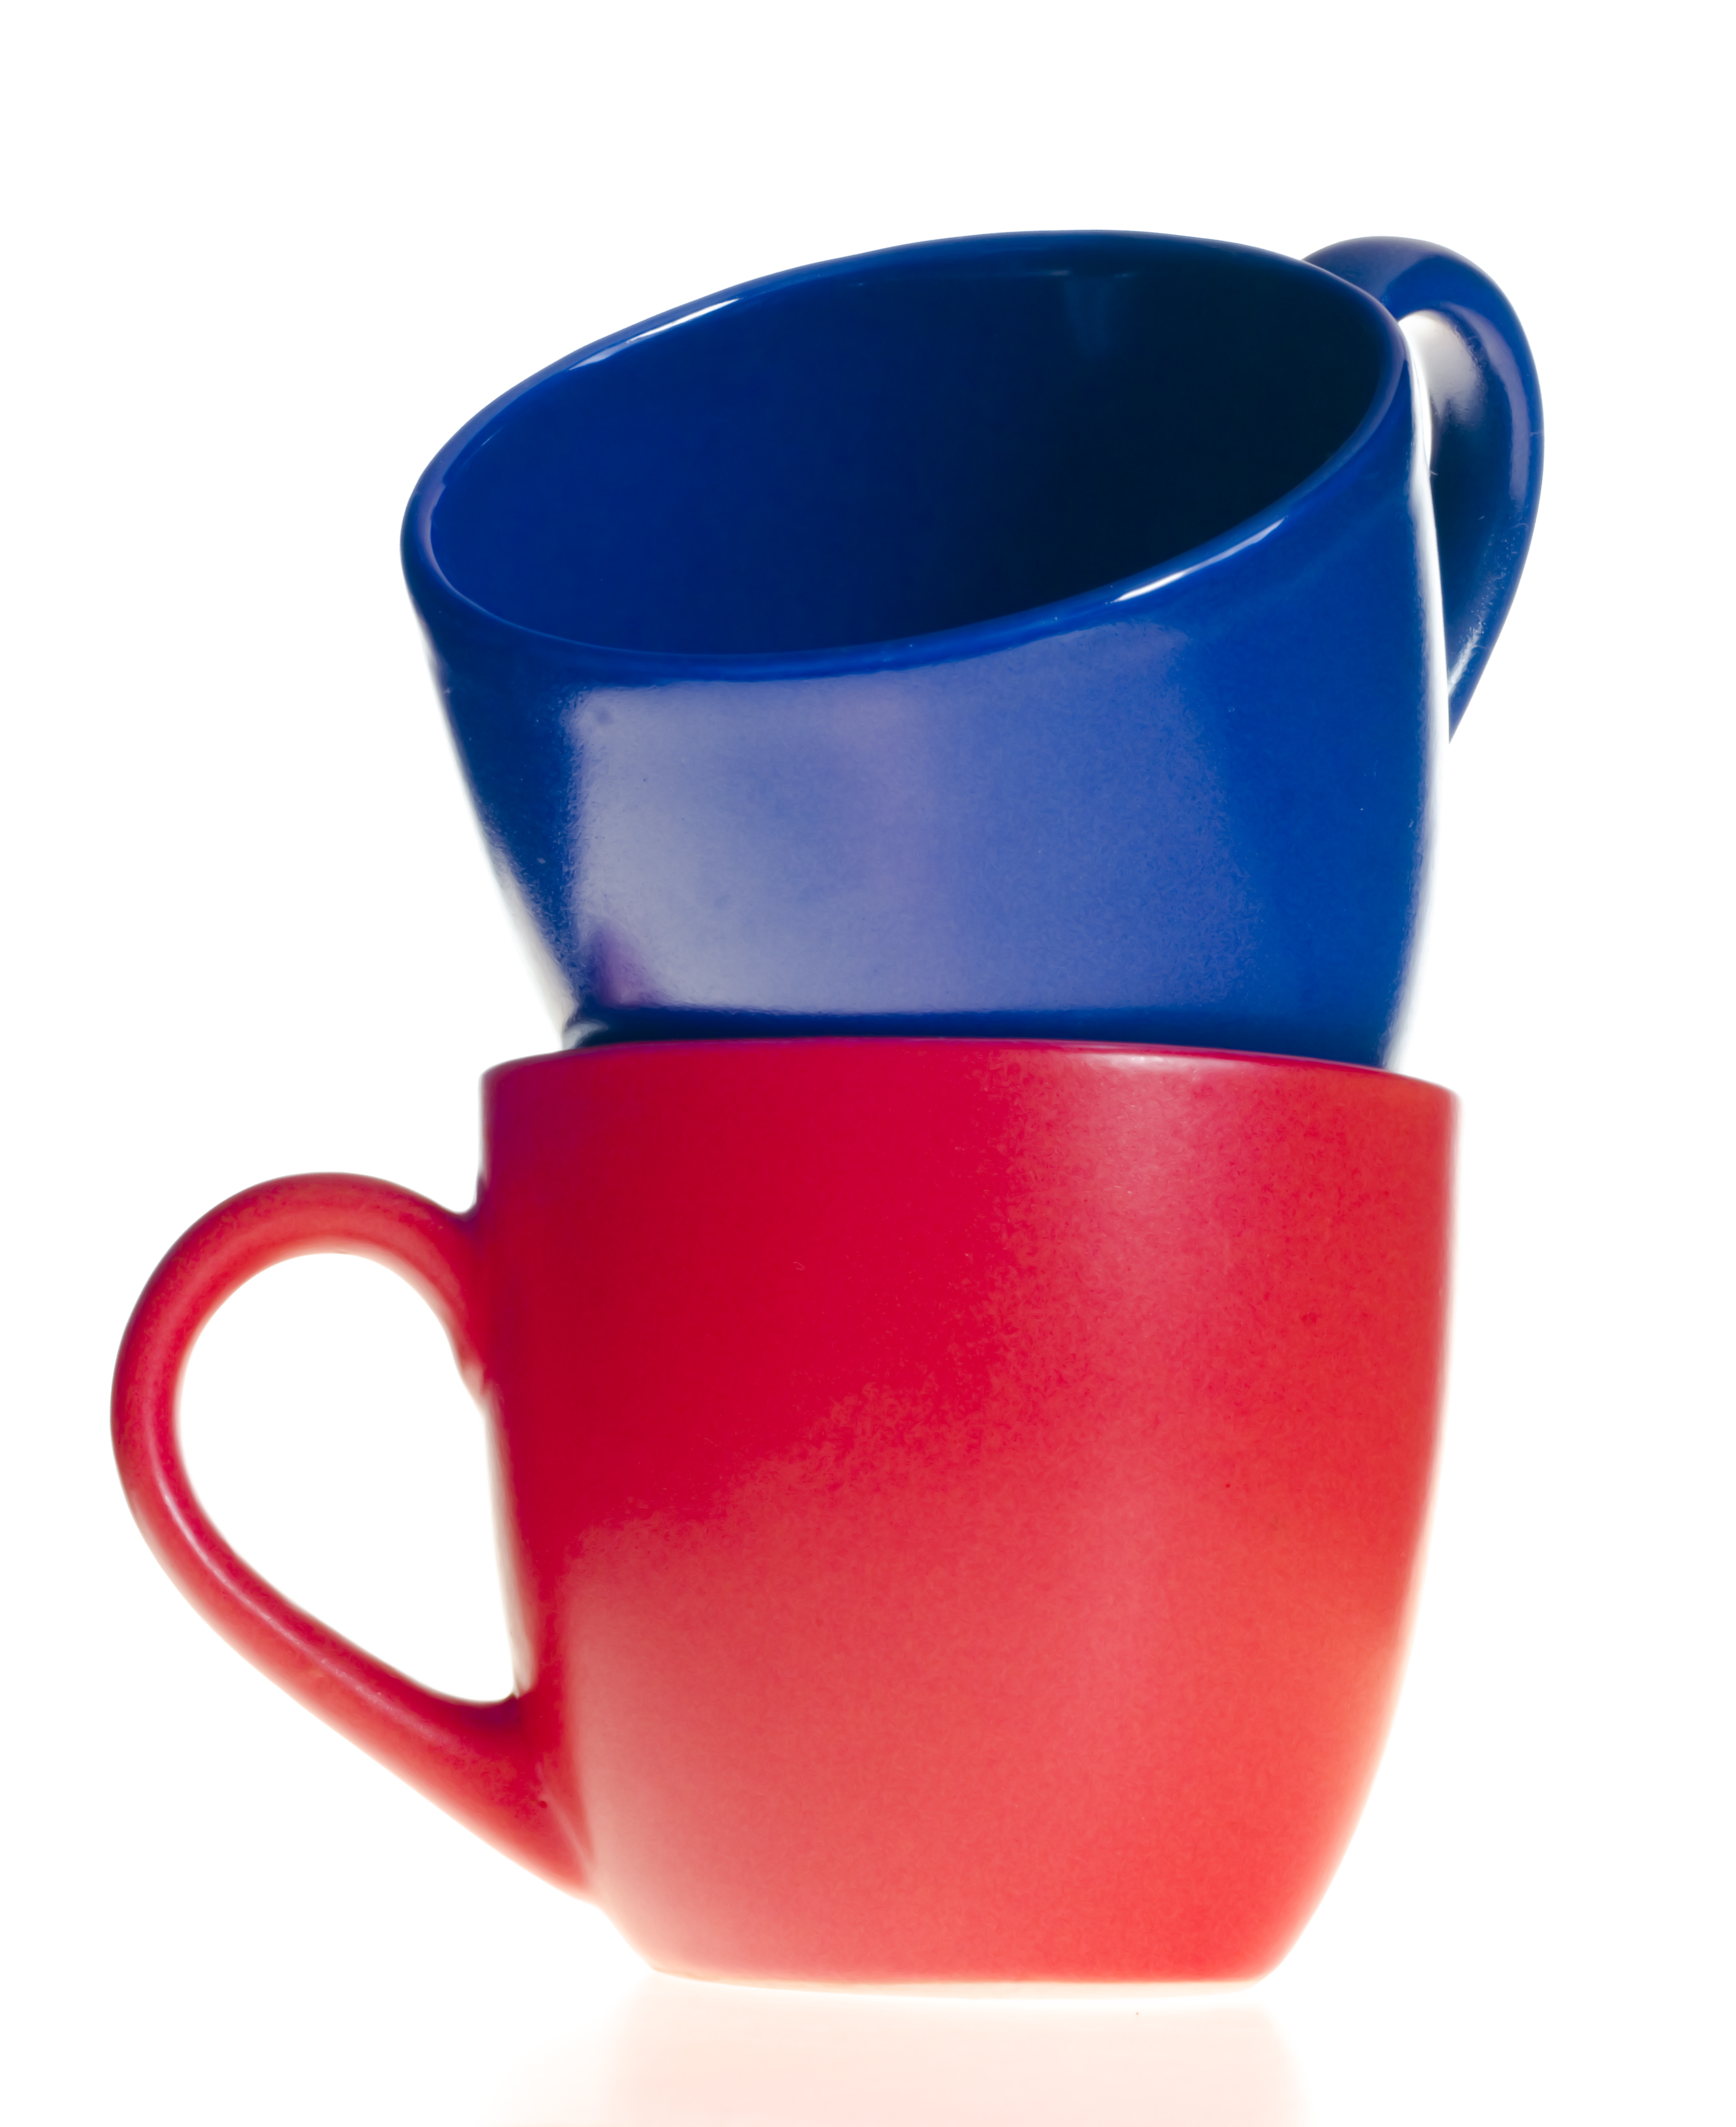 Red and blue cups photo